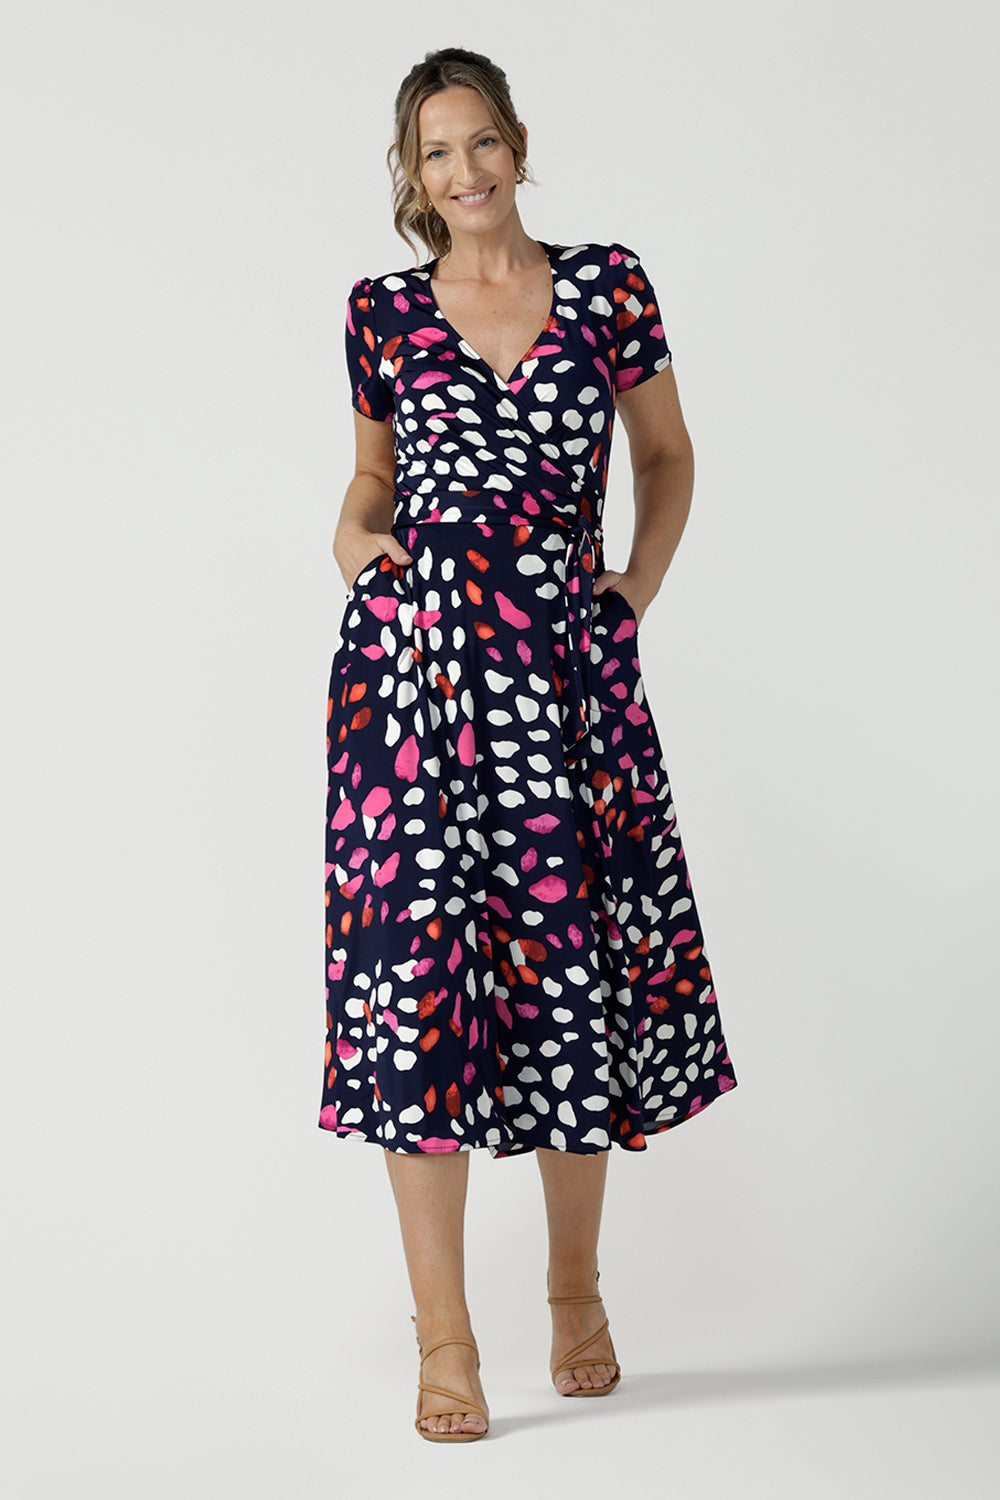 An over 40, size 10 woman wearing a abstract jersey print, wrap dress with short sleeves. A great dress for summer casual wear, or for travel. Shop made in Australia dresses in petite to plus sizes online at Australian fashion brand, Leina & Fleur.